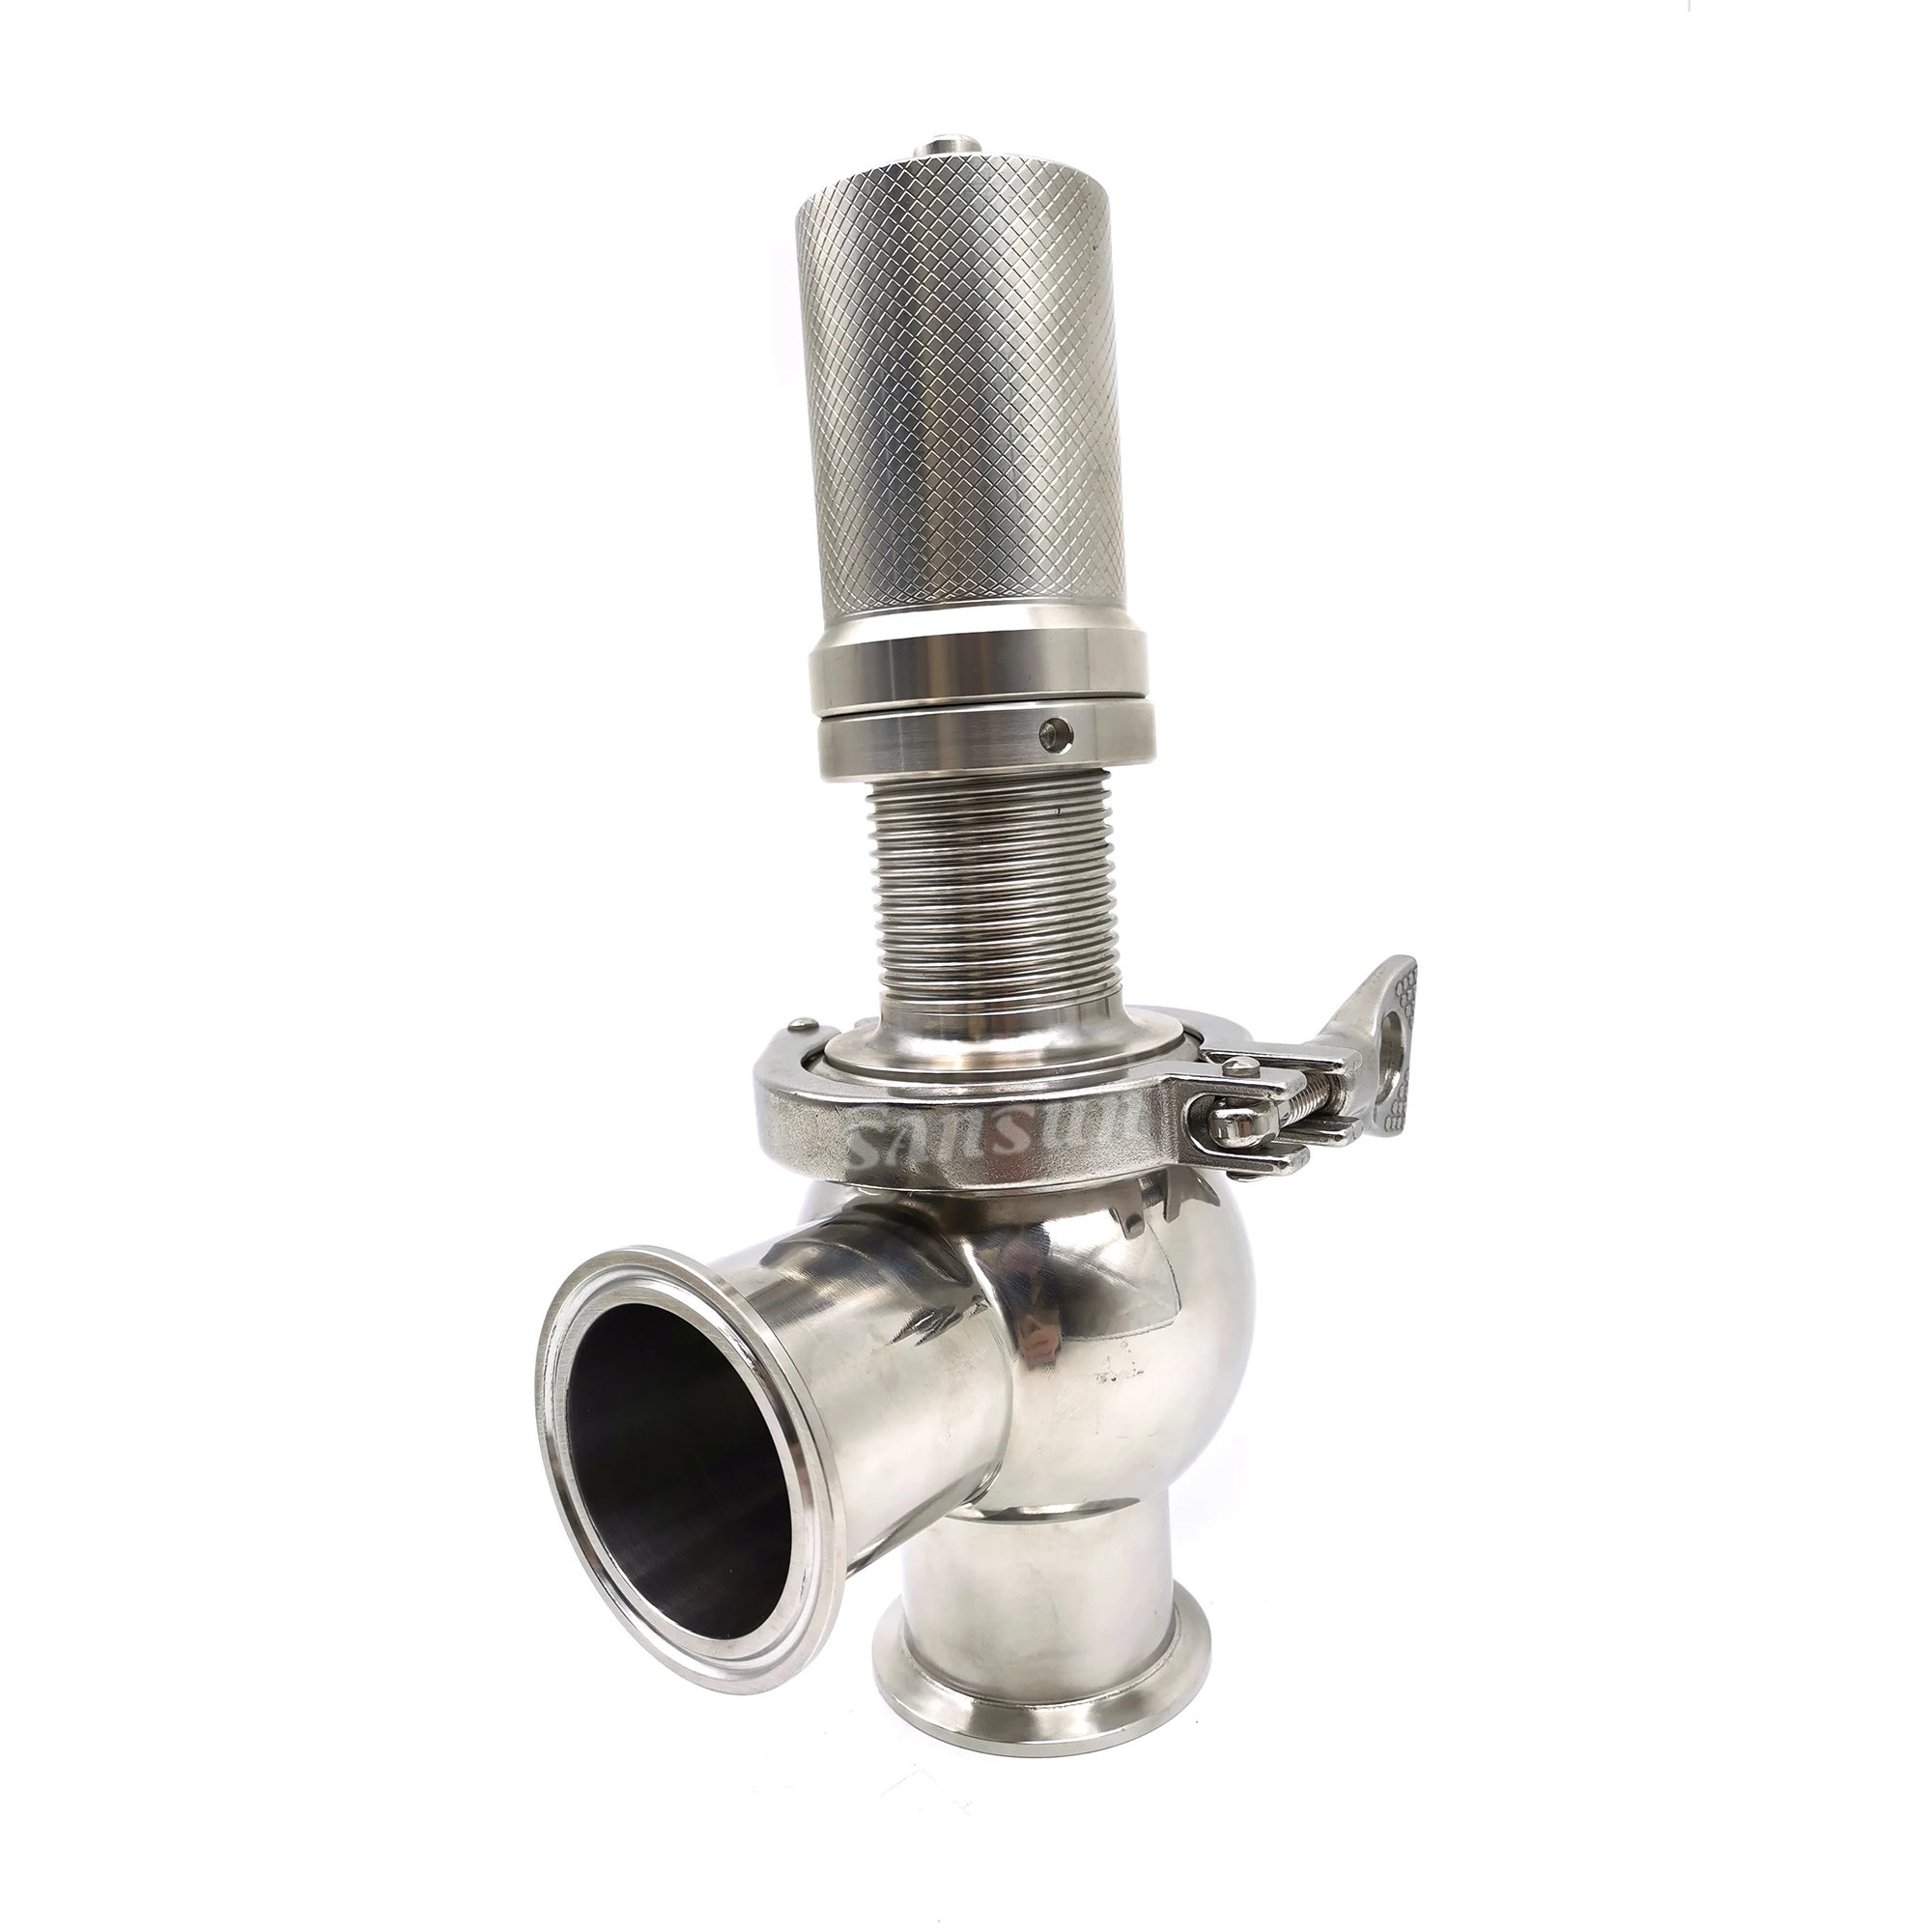 

Stainless steel safety relief valves sanitary pressure safety air release valve